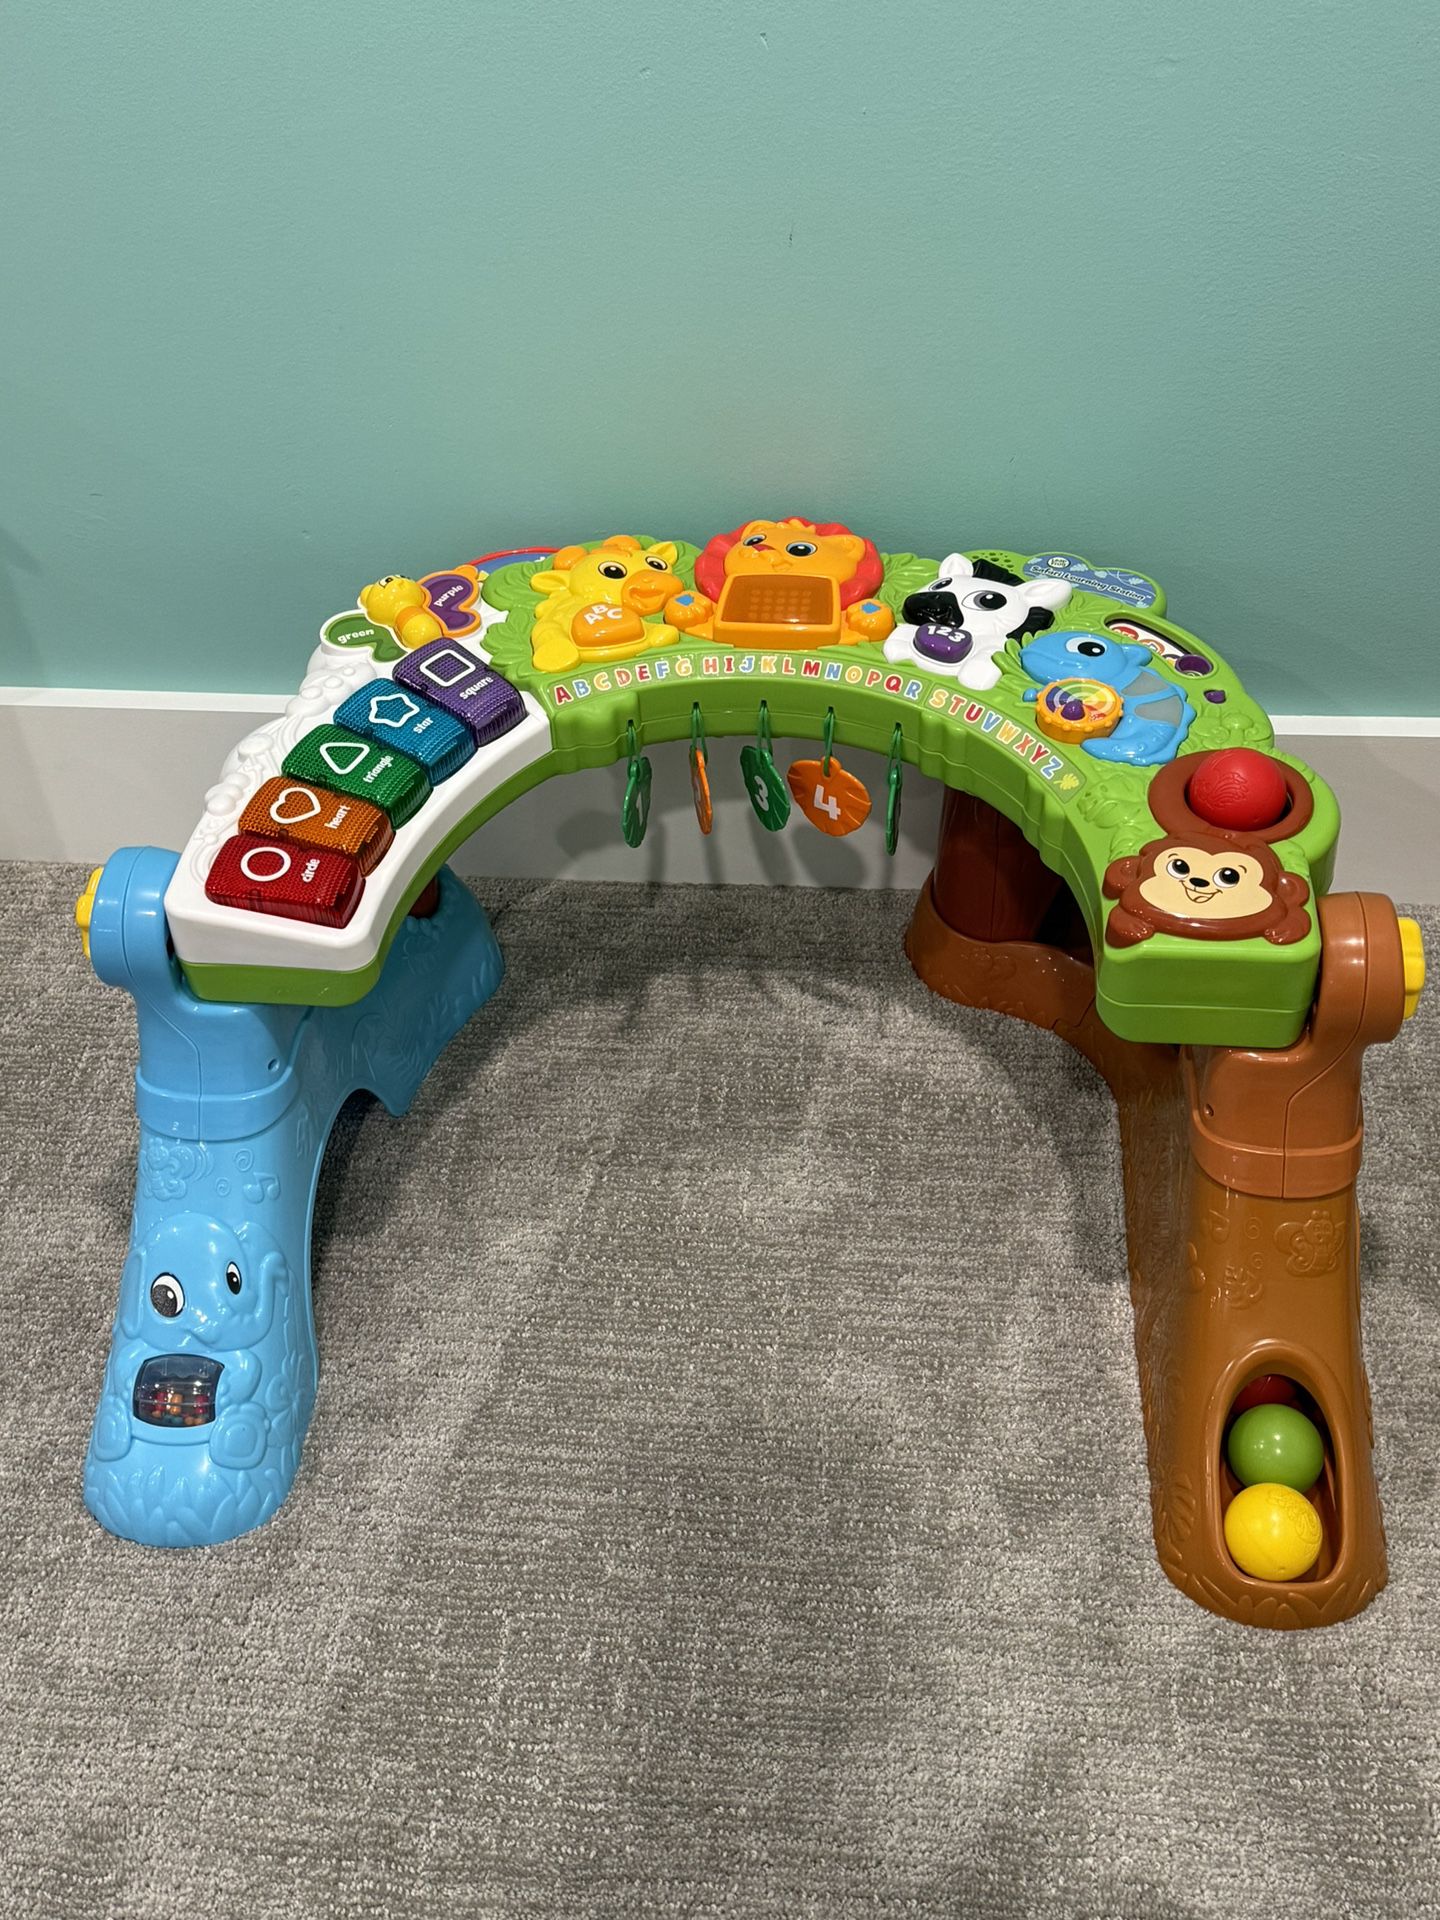 Leapfrog Baby Toddler Activity Table Toy